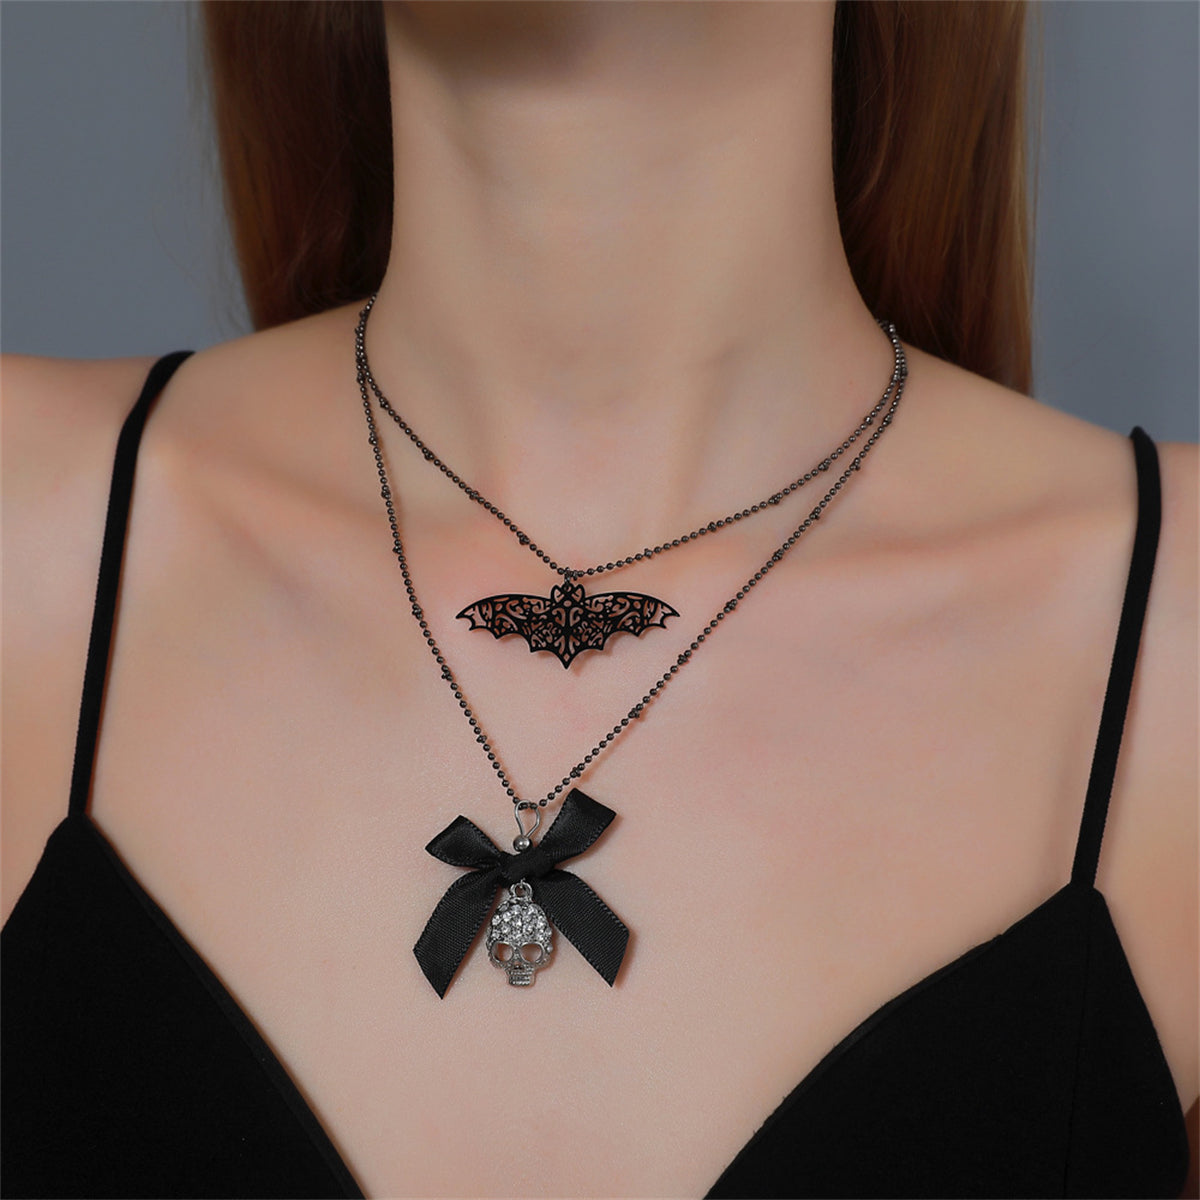 Cubic Zirconia & Silver-Plated Bat Bow Layered Pendant Necklace